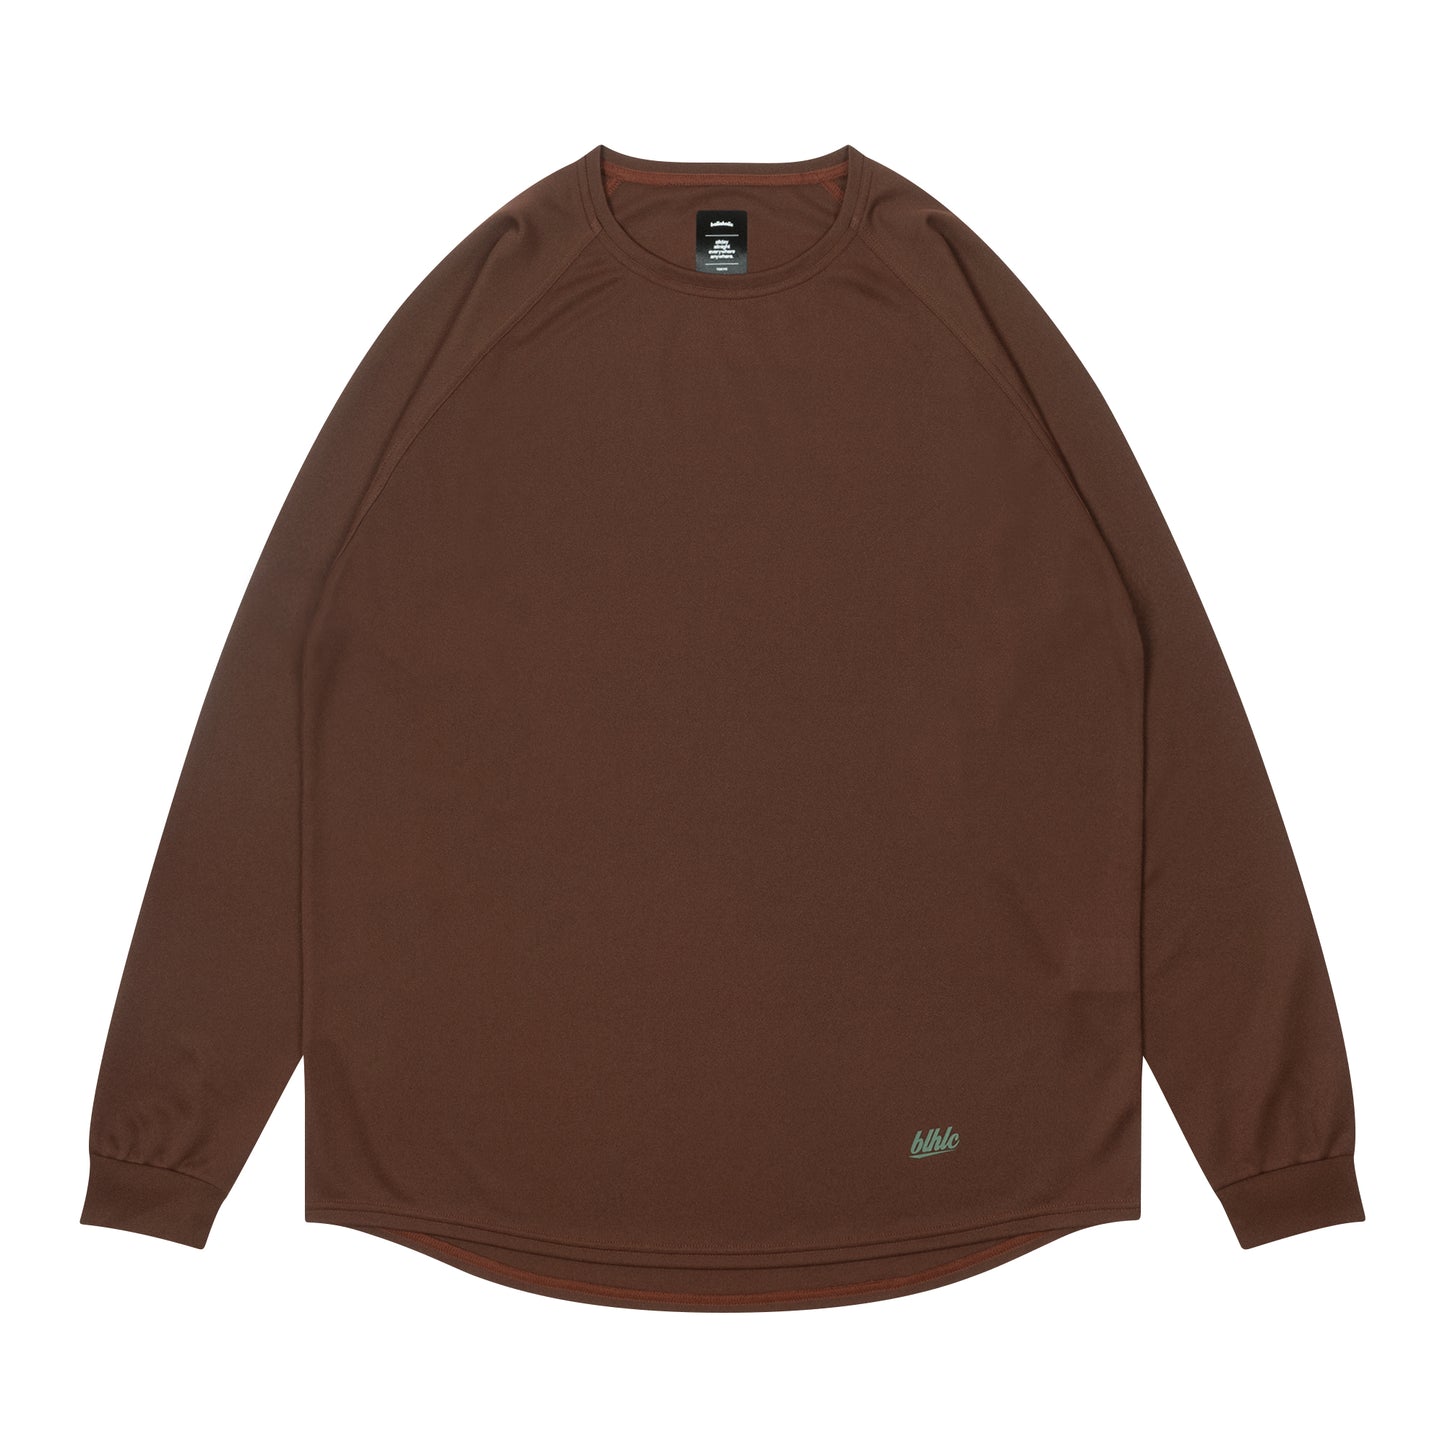 blhlc Back Print Cool Long Tee (brown/north)